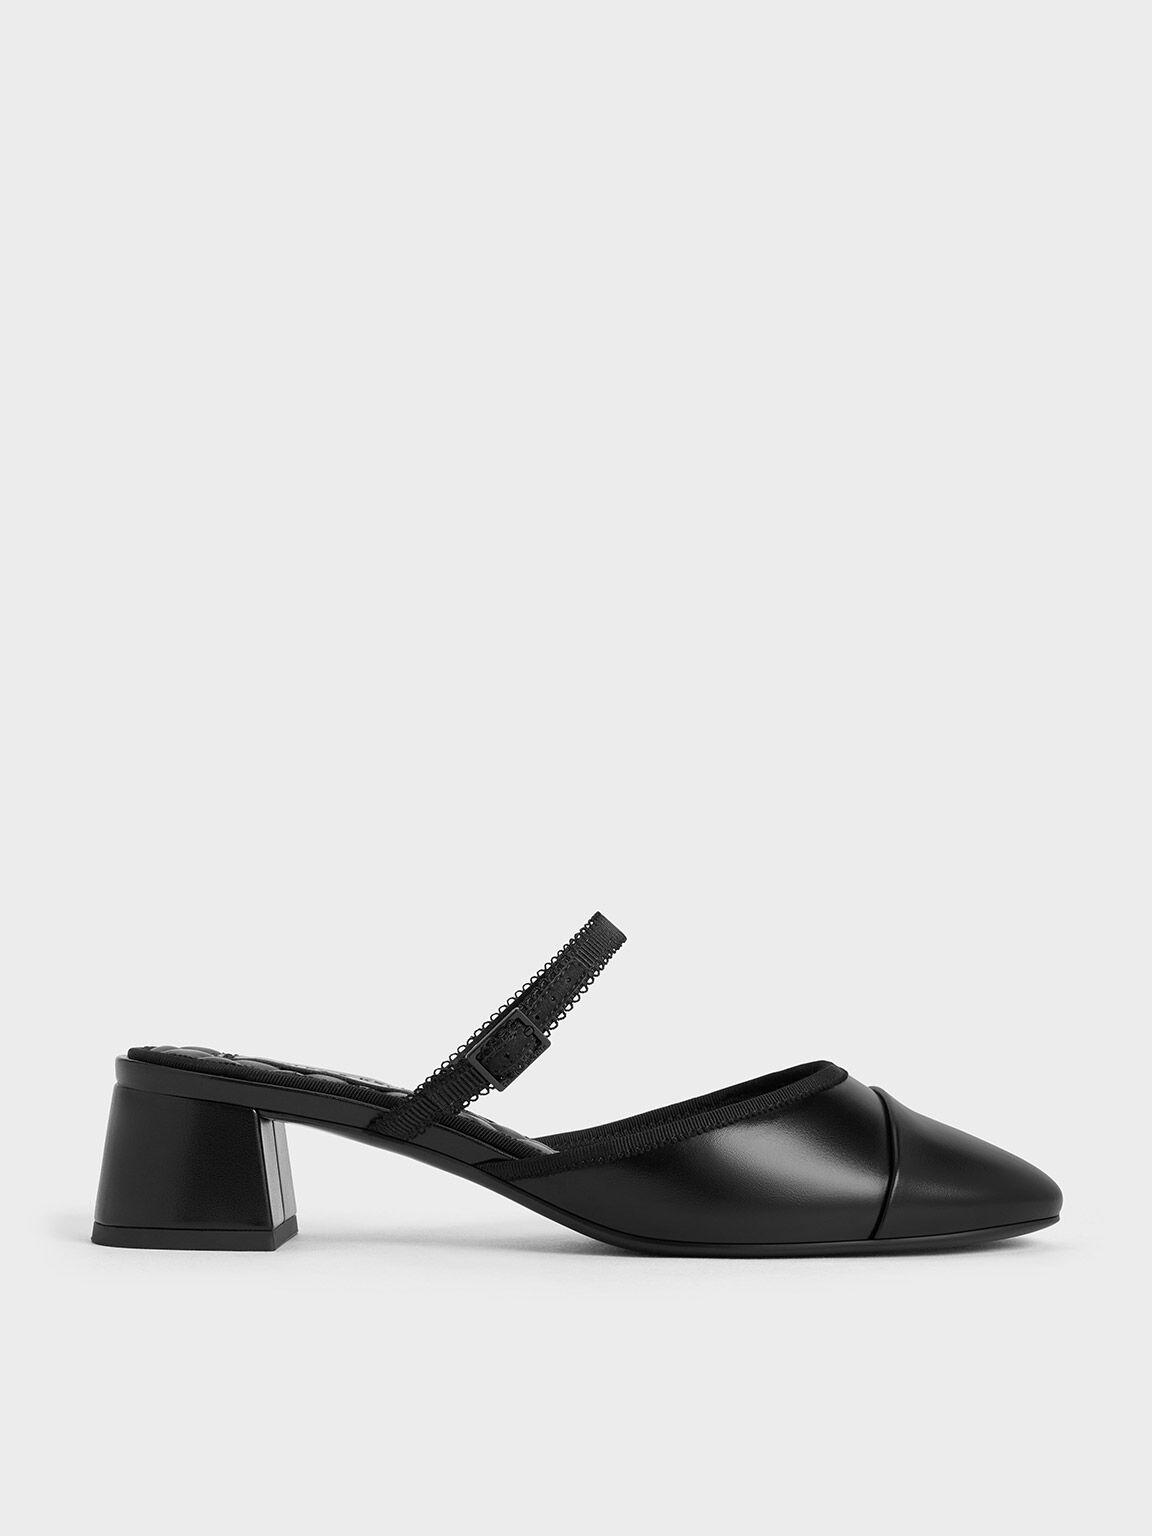 Women's Shoes | Shop Exclusive Styles | CHARLES & KEITH International